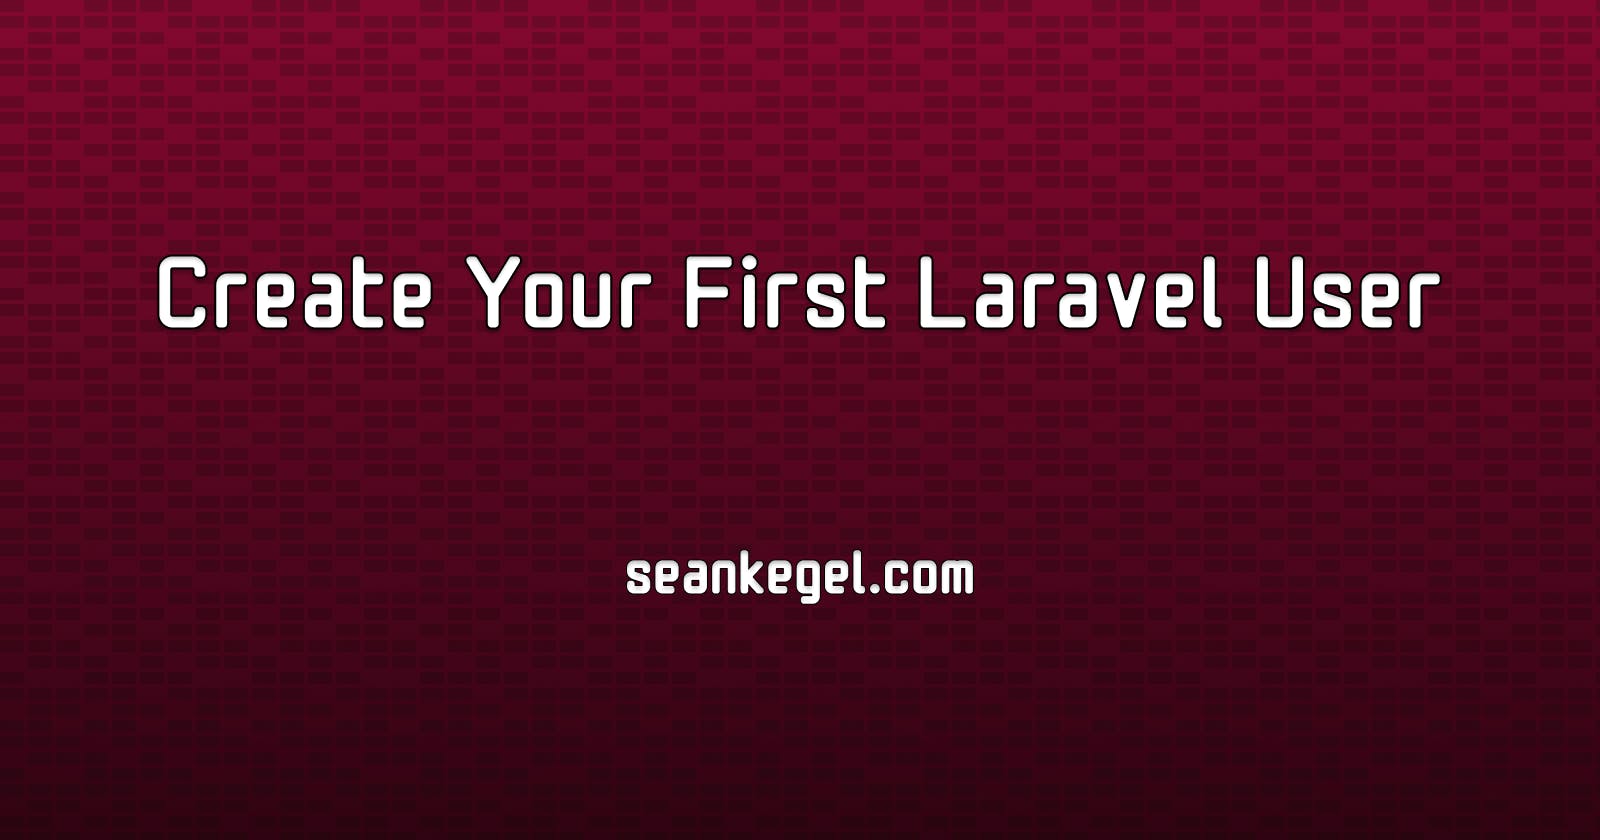 Create Your First Laravel User